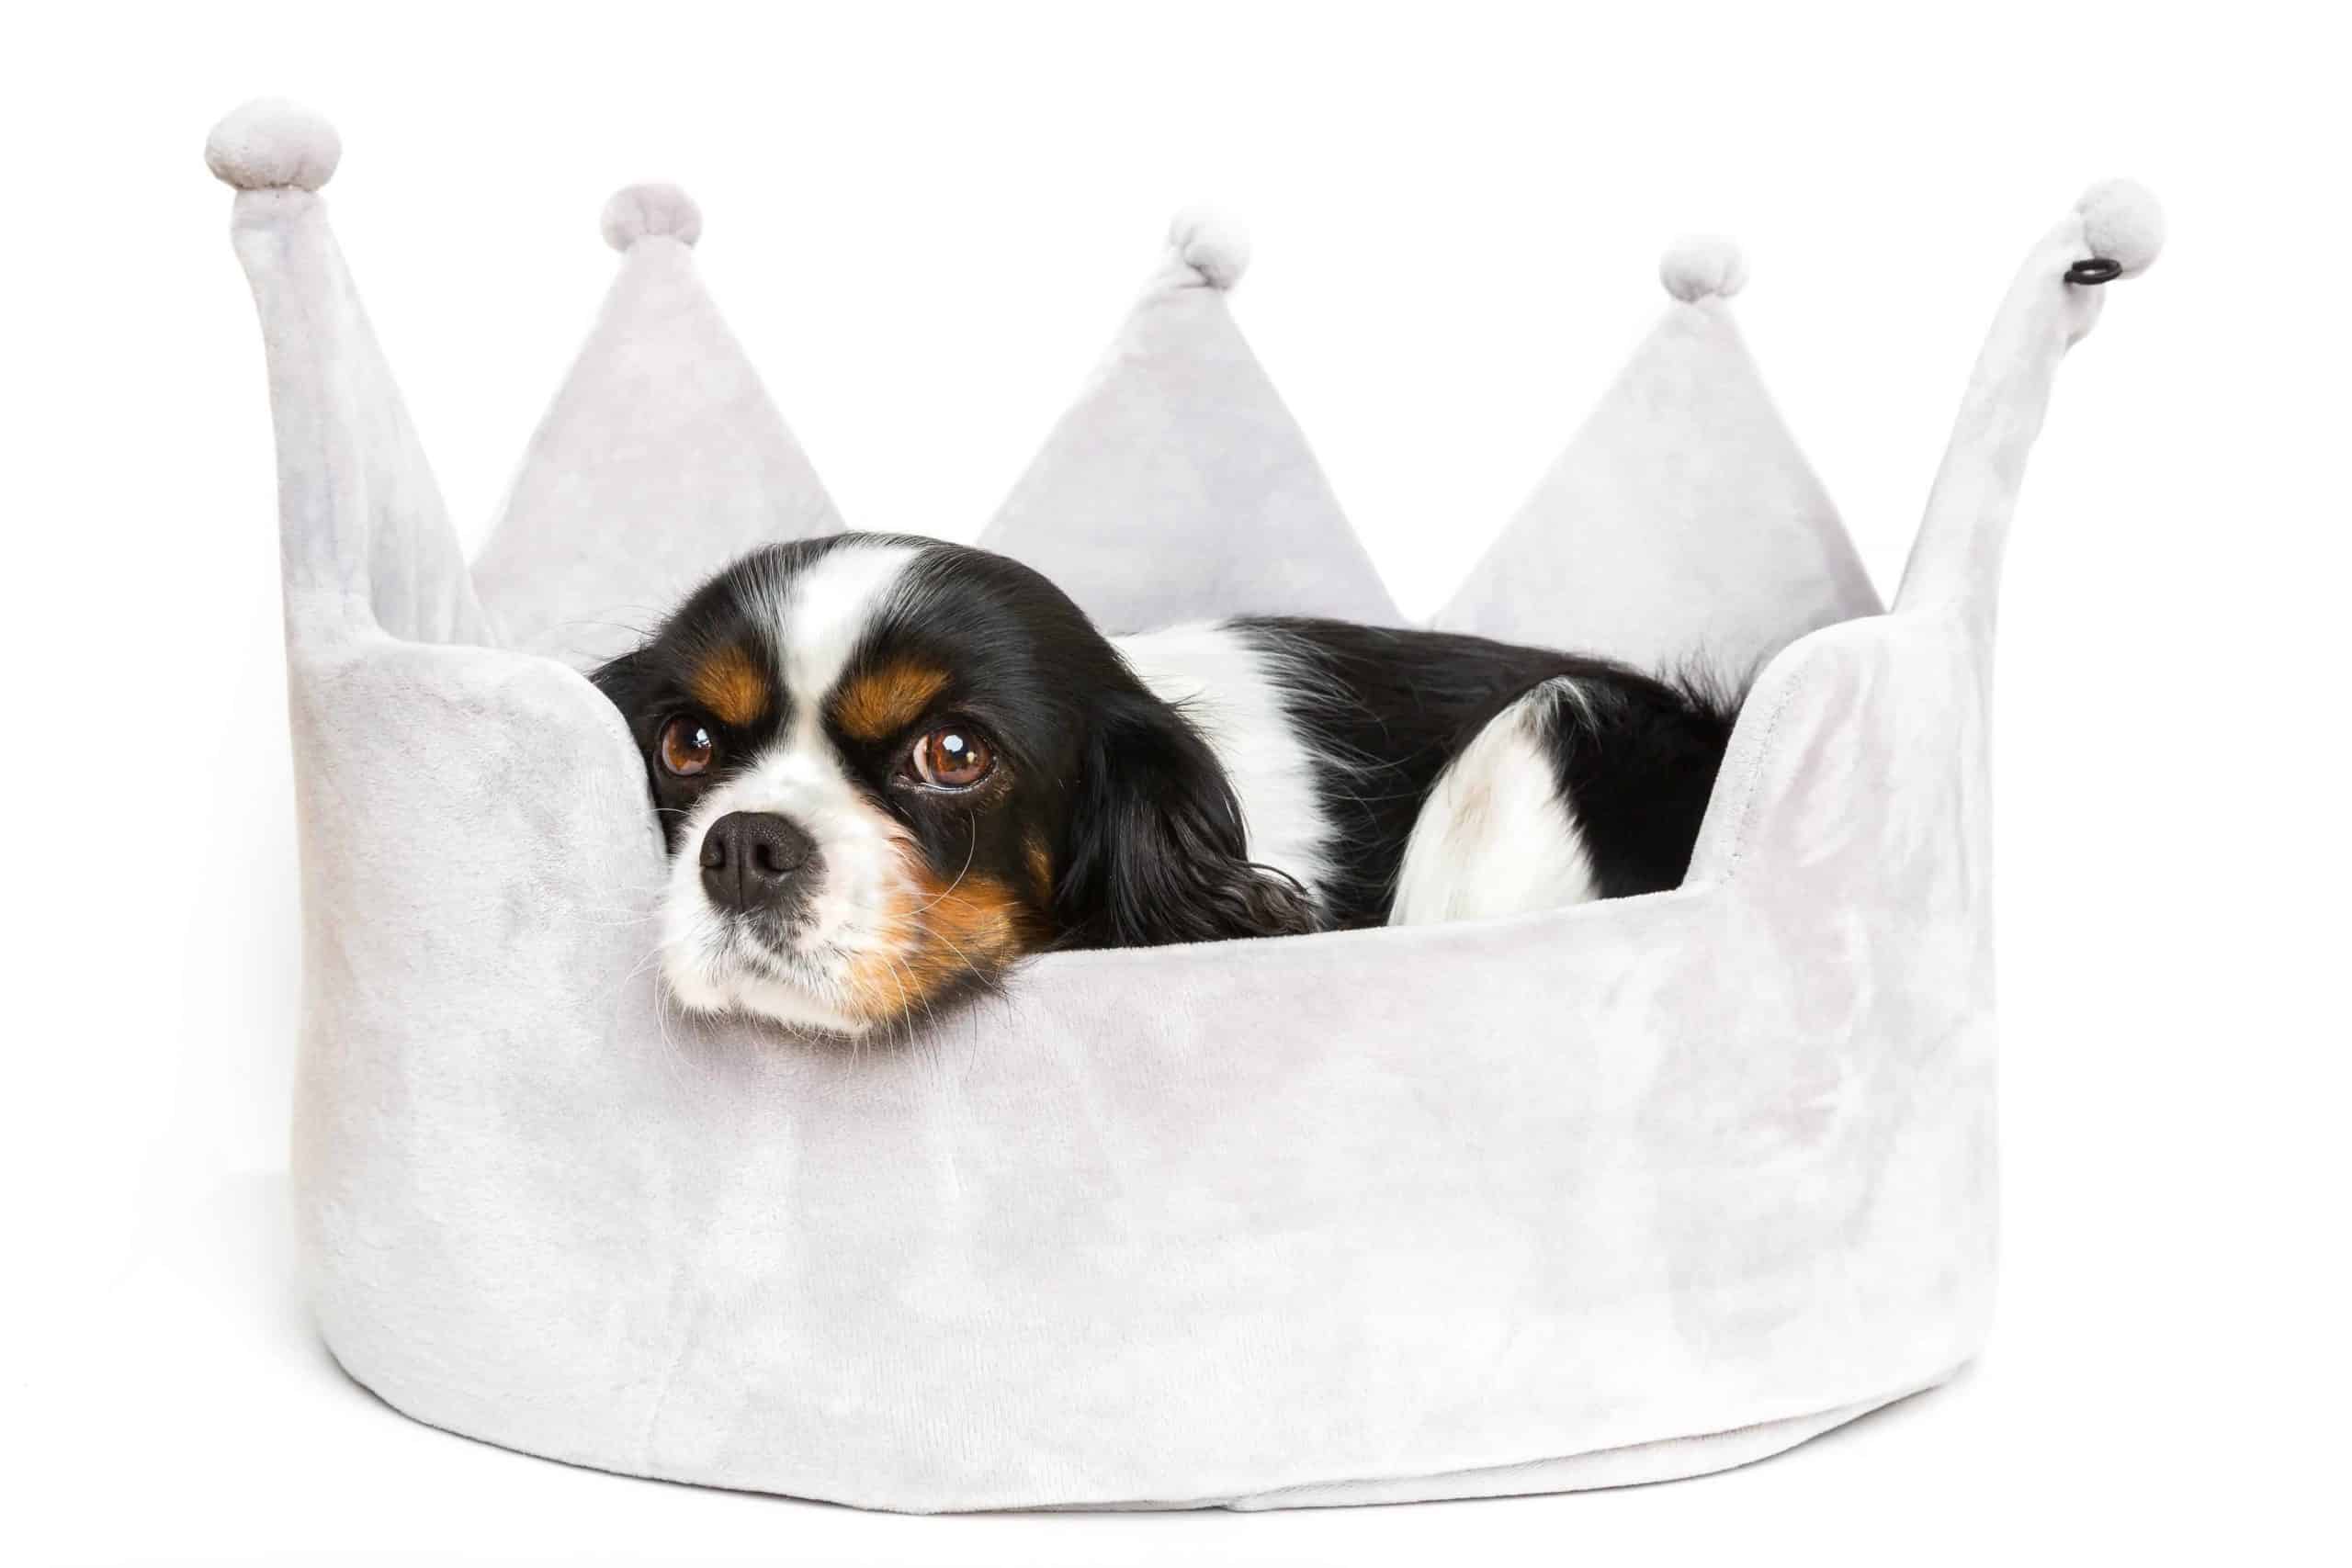 Cavalier King Charles Spaniel puppy after a bath snuggles into dog bed that looks like a crown. A bed is one of the dog supplies you should buy.